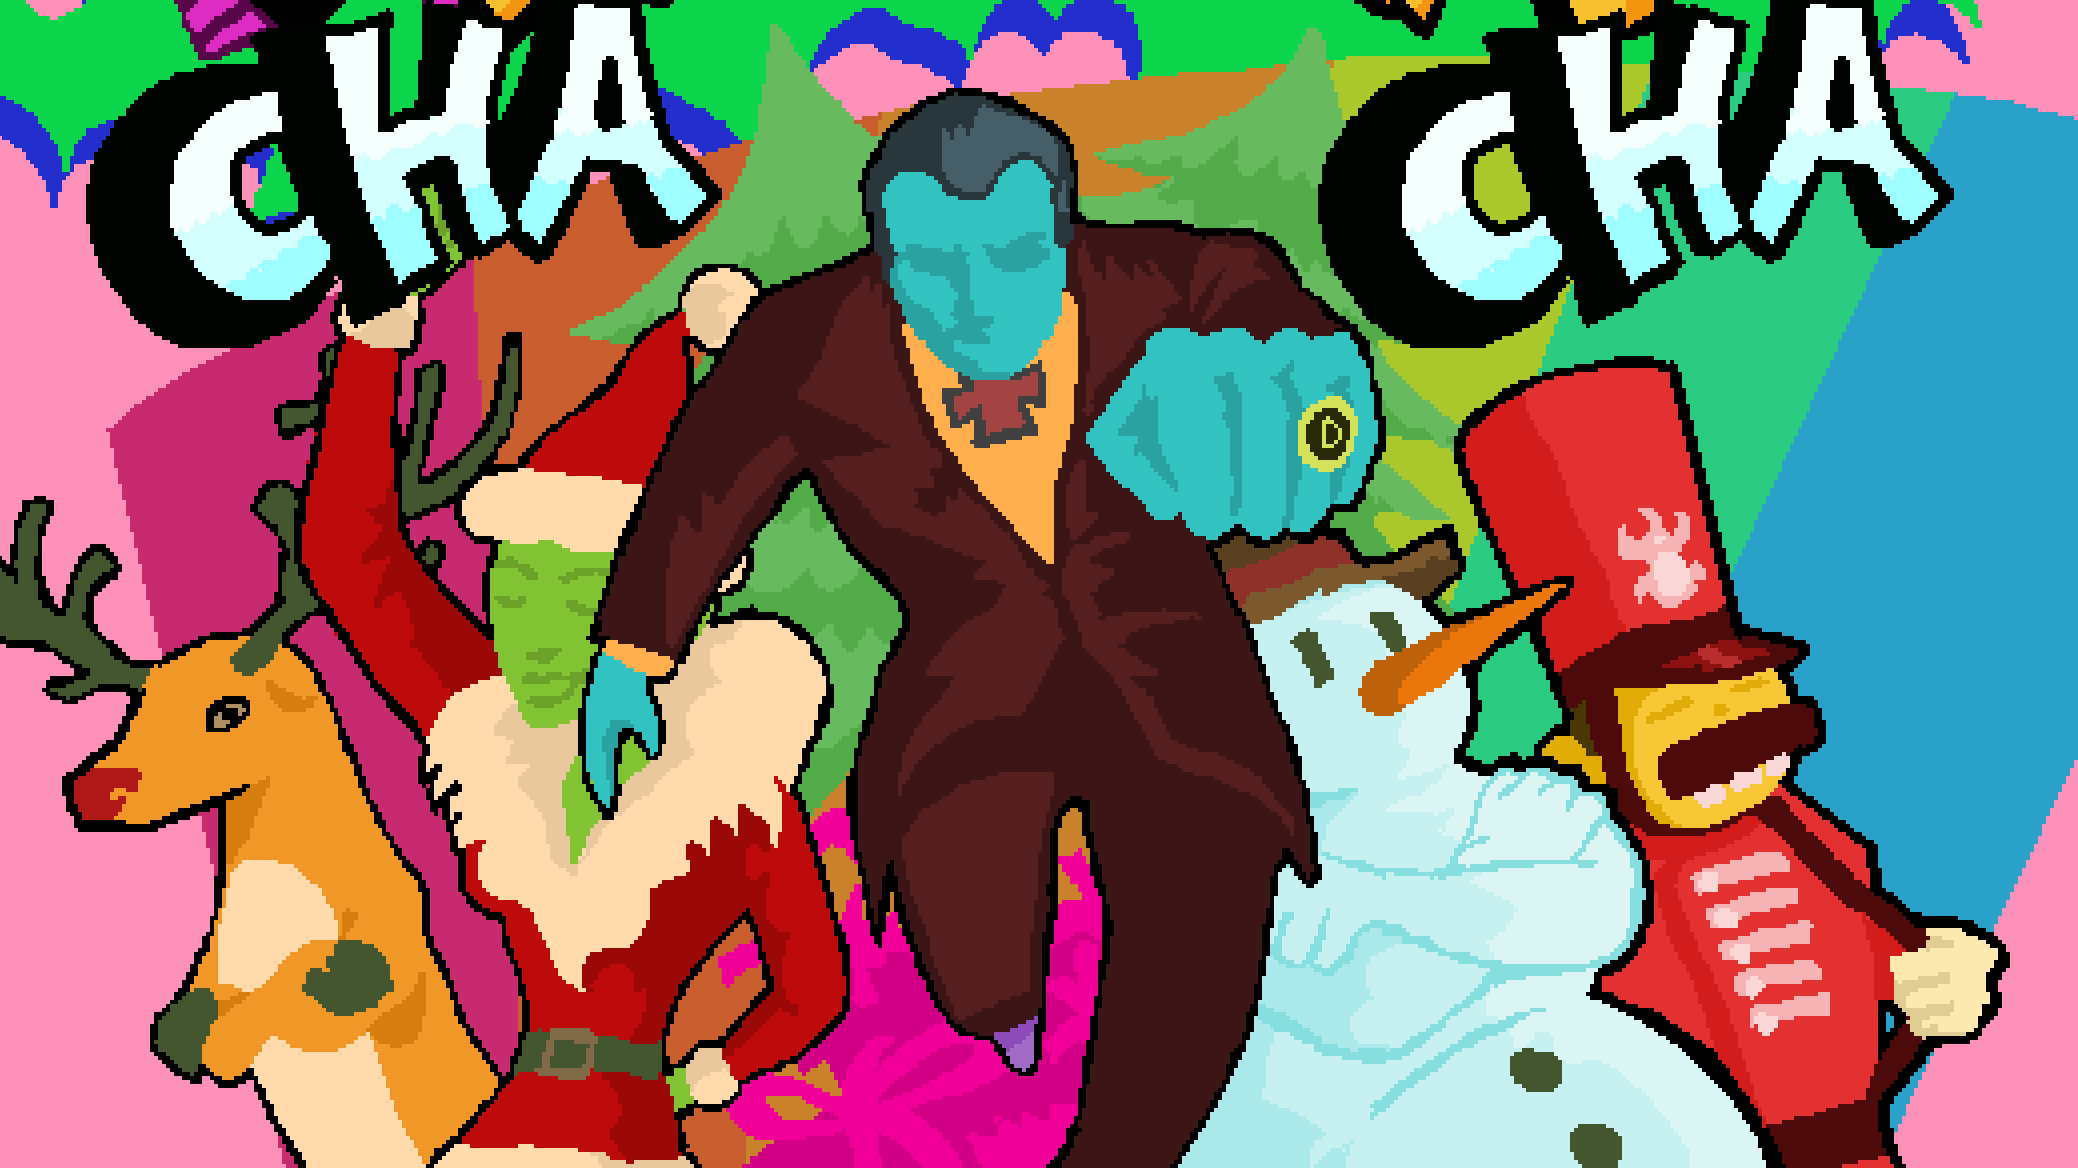 Dracula strikes a punchy pose surrounded by Christmas foes on the title screen art for Dracula Cha Cha.